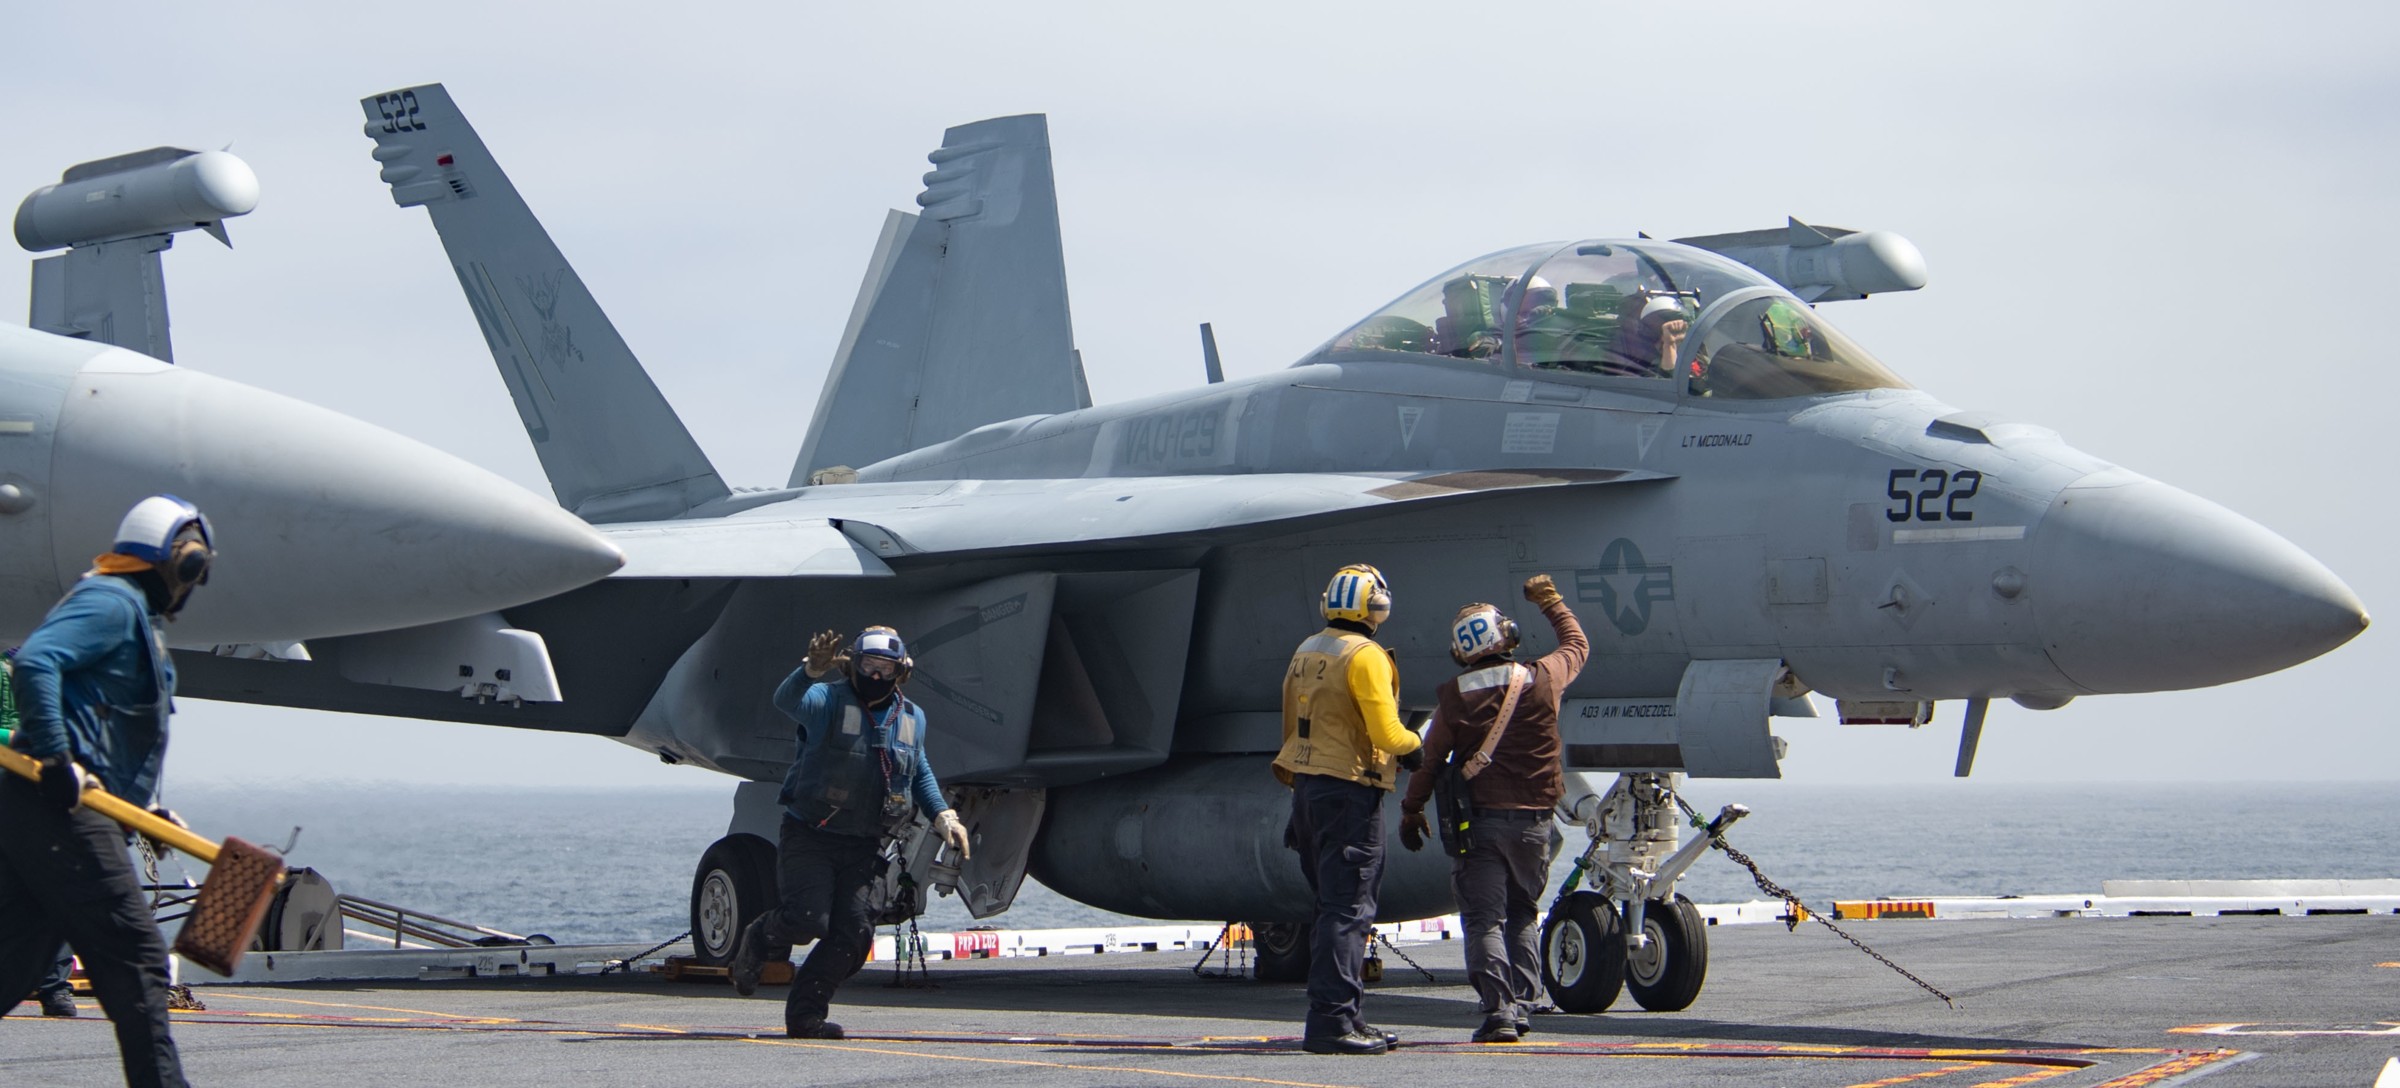 vaq-129 vikings electronic attack squadron fleet replacement frs us navy ea-18g growler 56